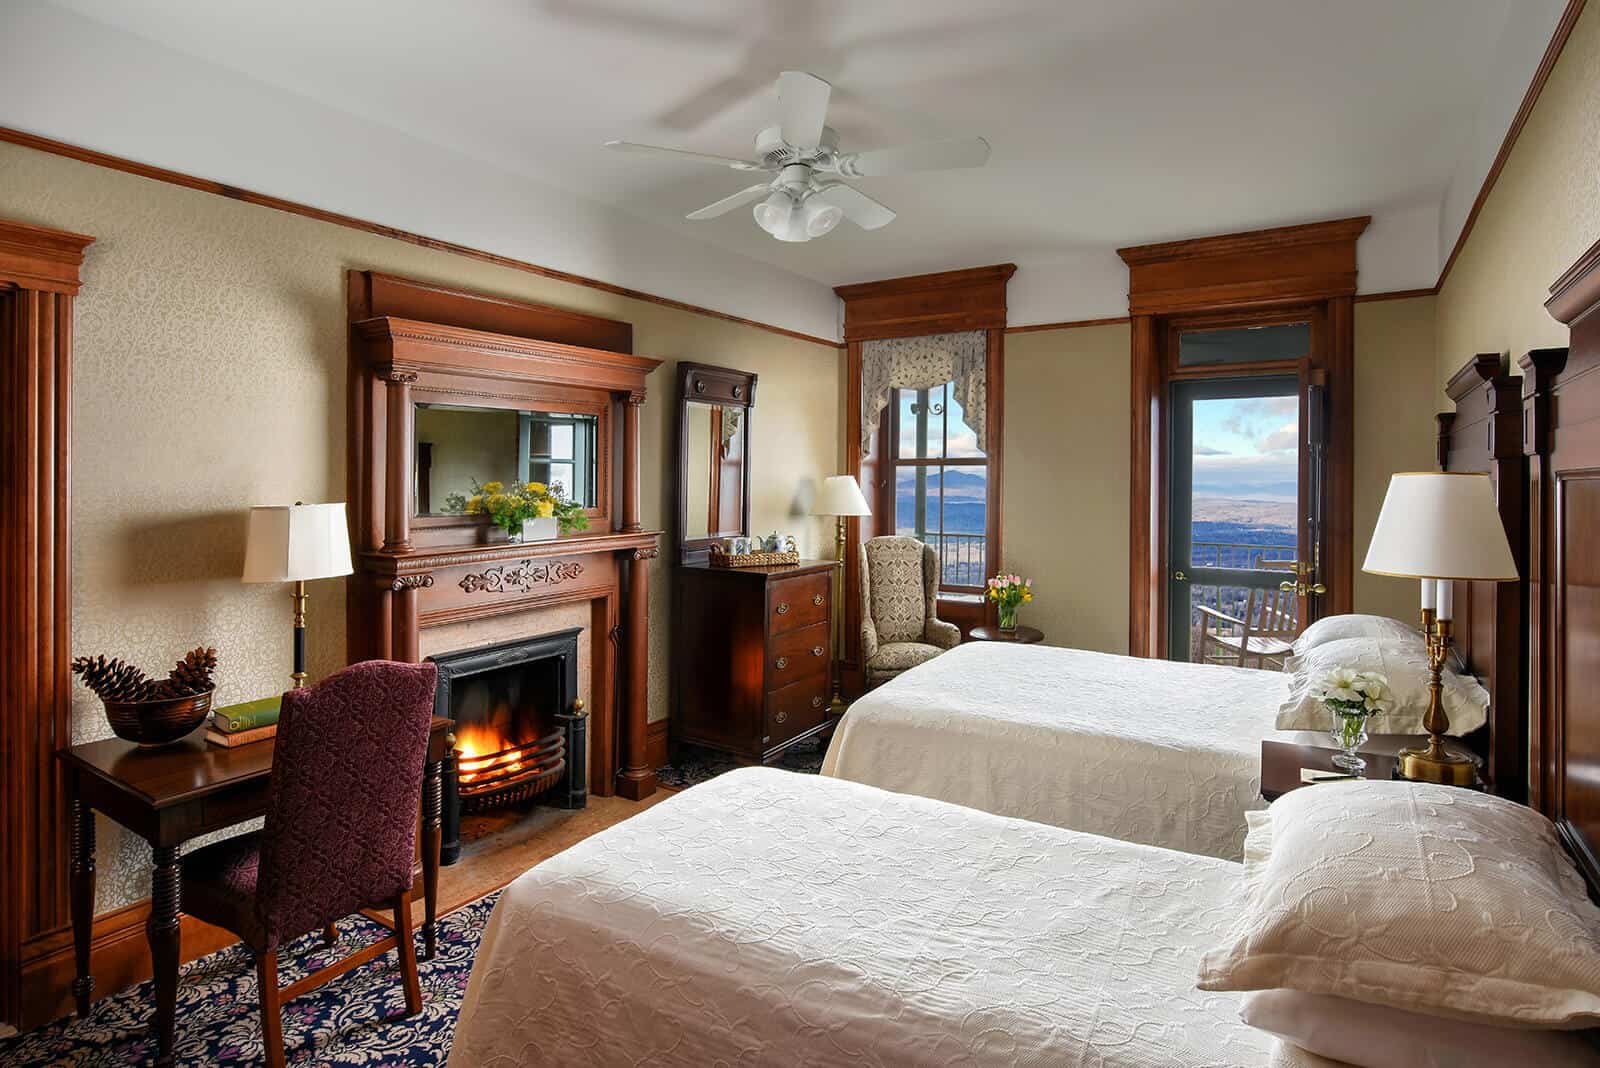 Mohonk Mountain House Accommodations - Hudson Valley View